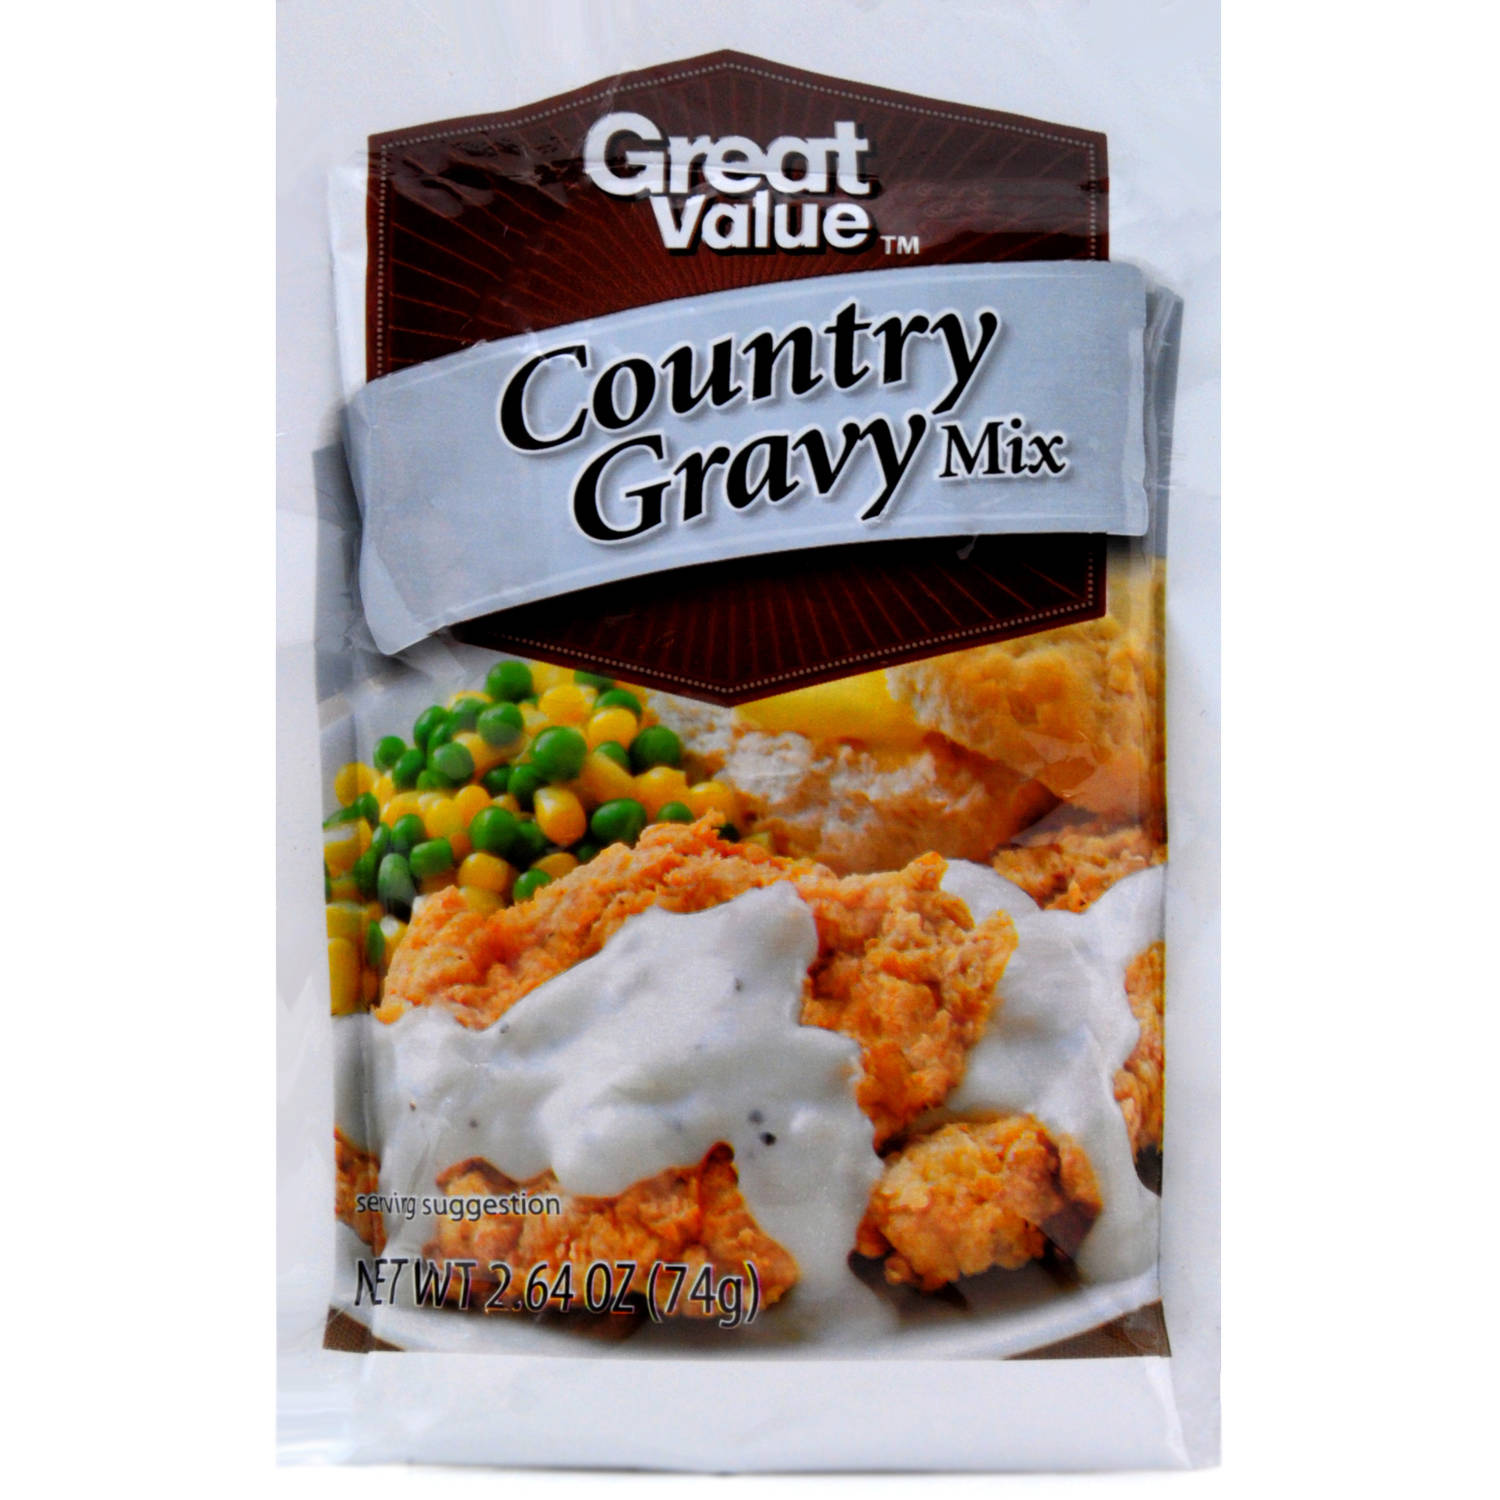 (4 Pack) Great Value Country Style Gravy Mix, 2.64 Oz Image